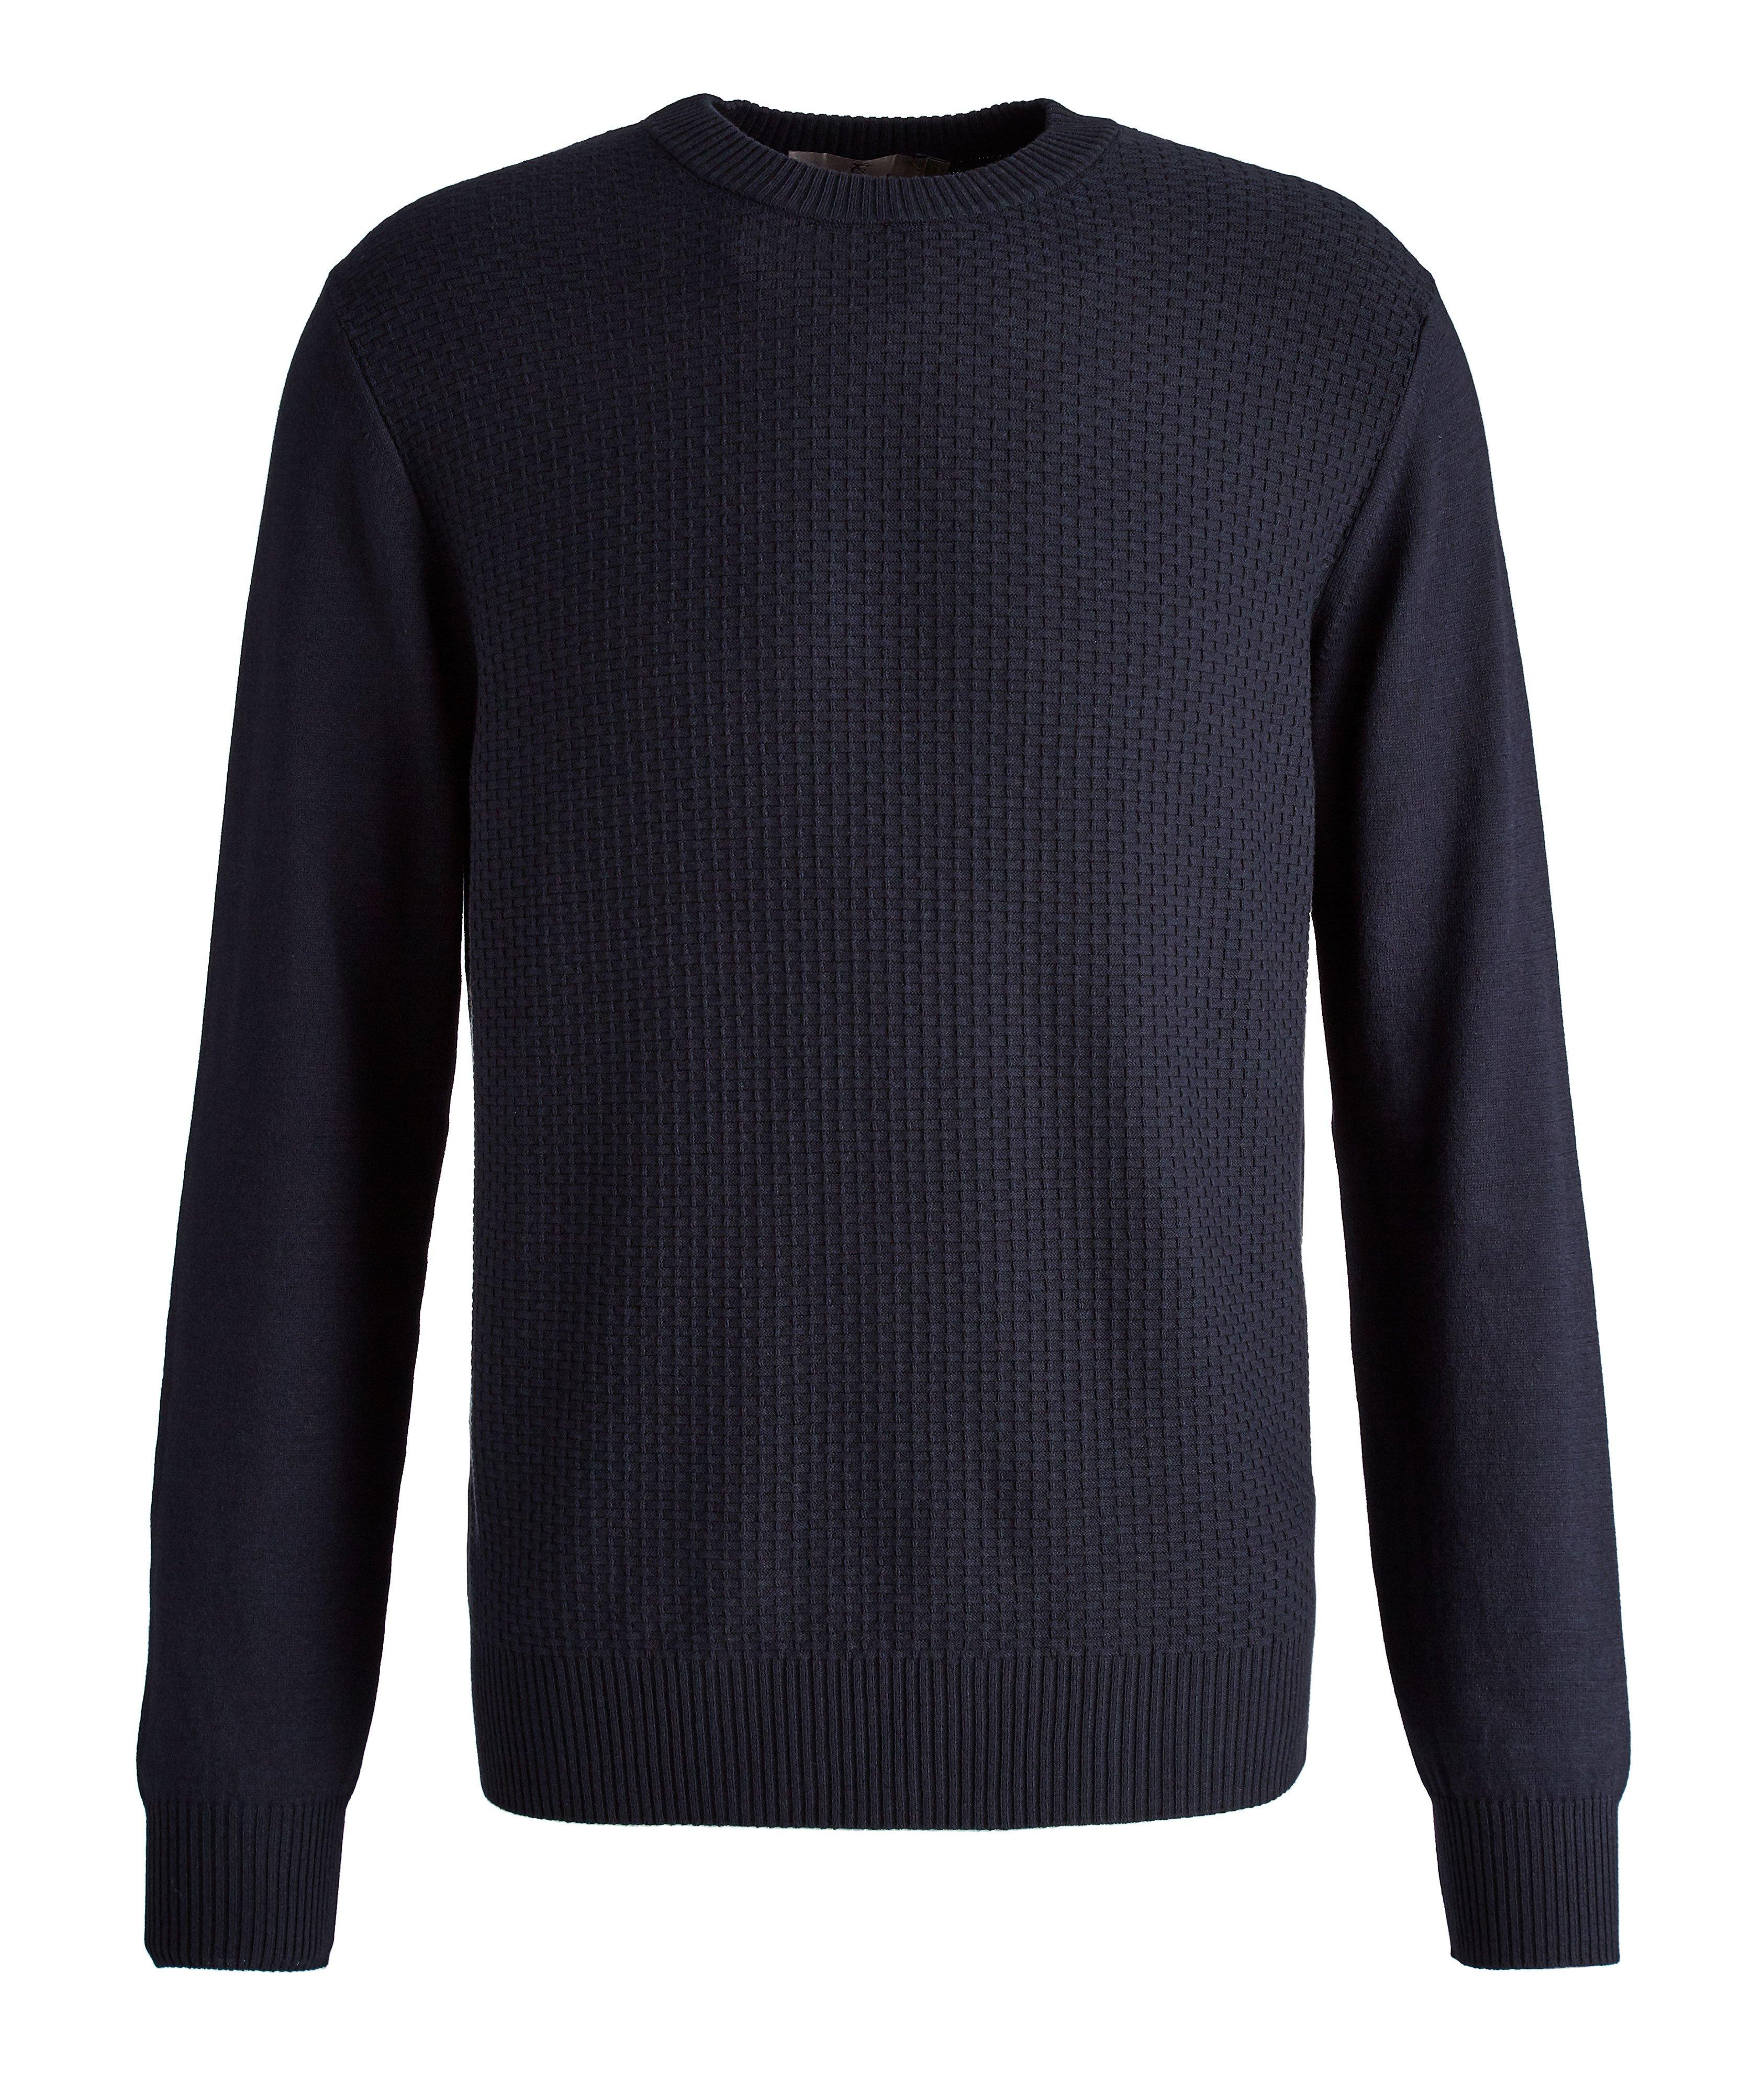 Textured Cotton-Blend Sweater image 0